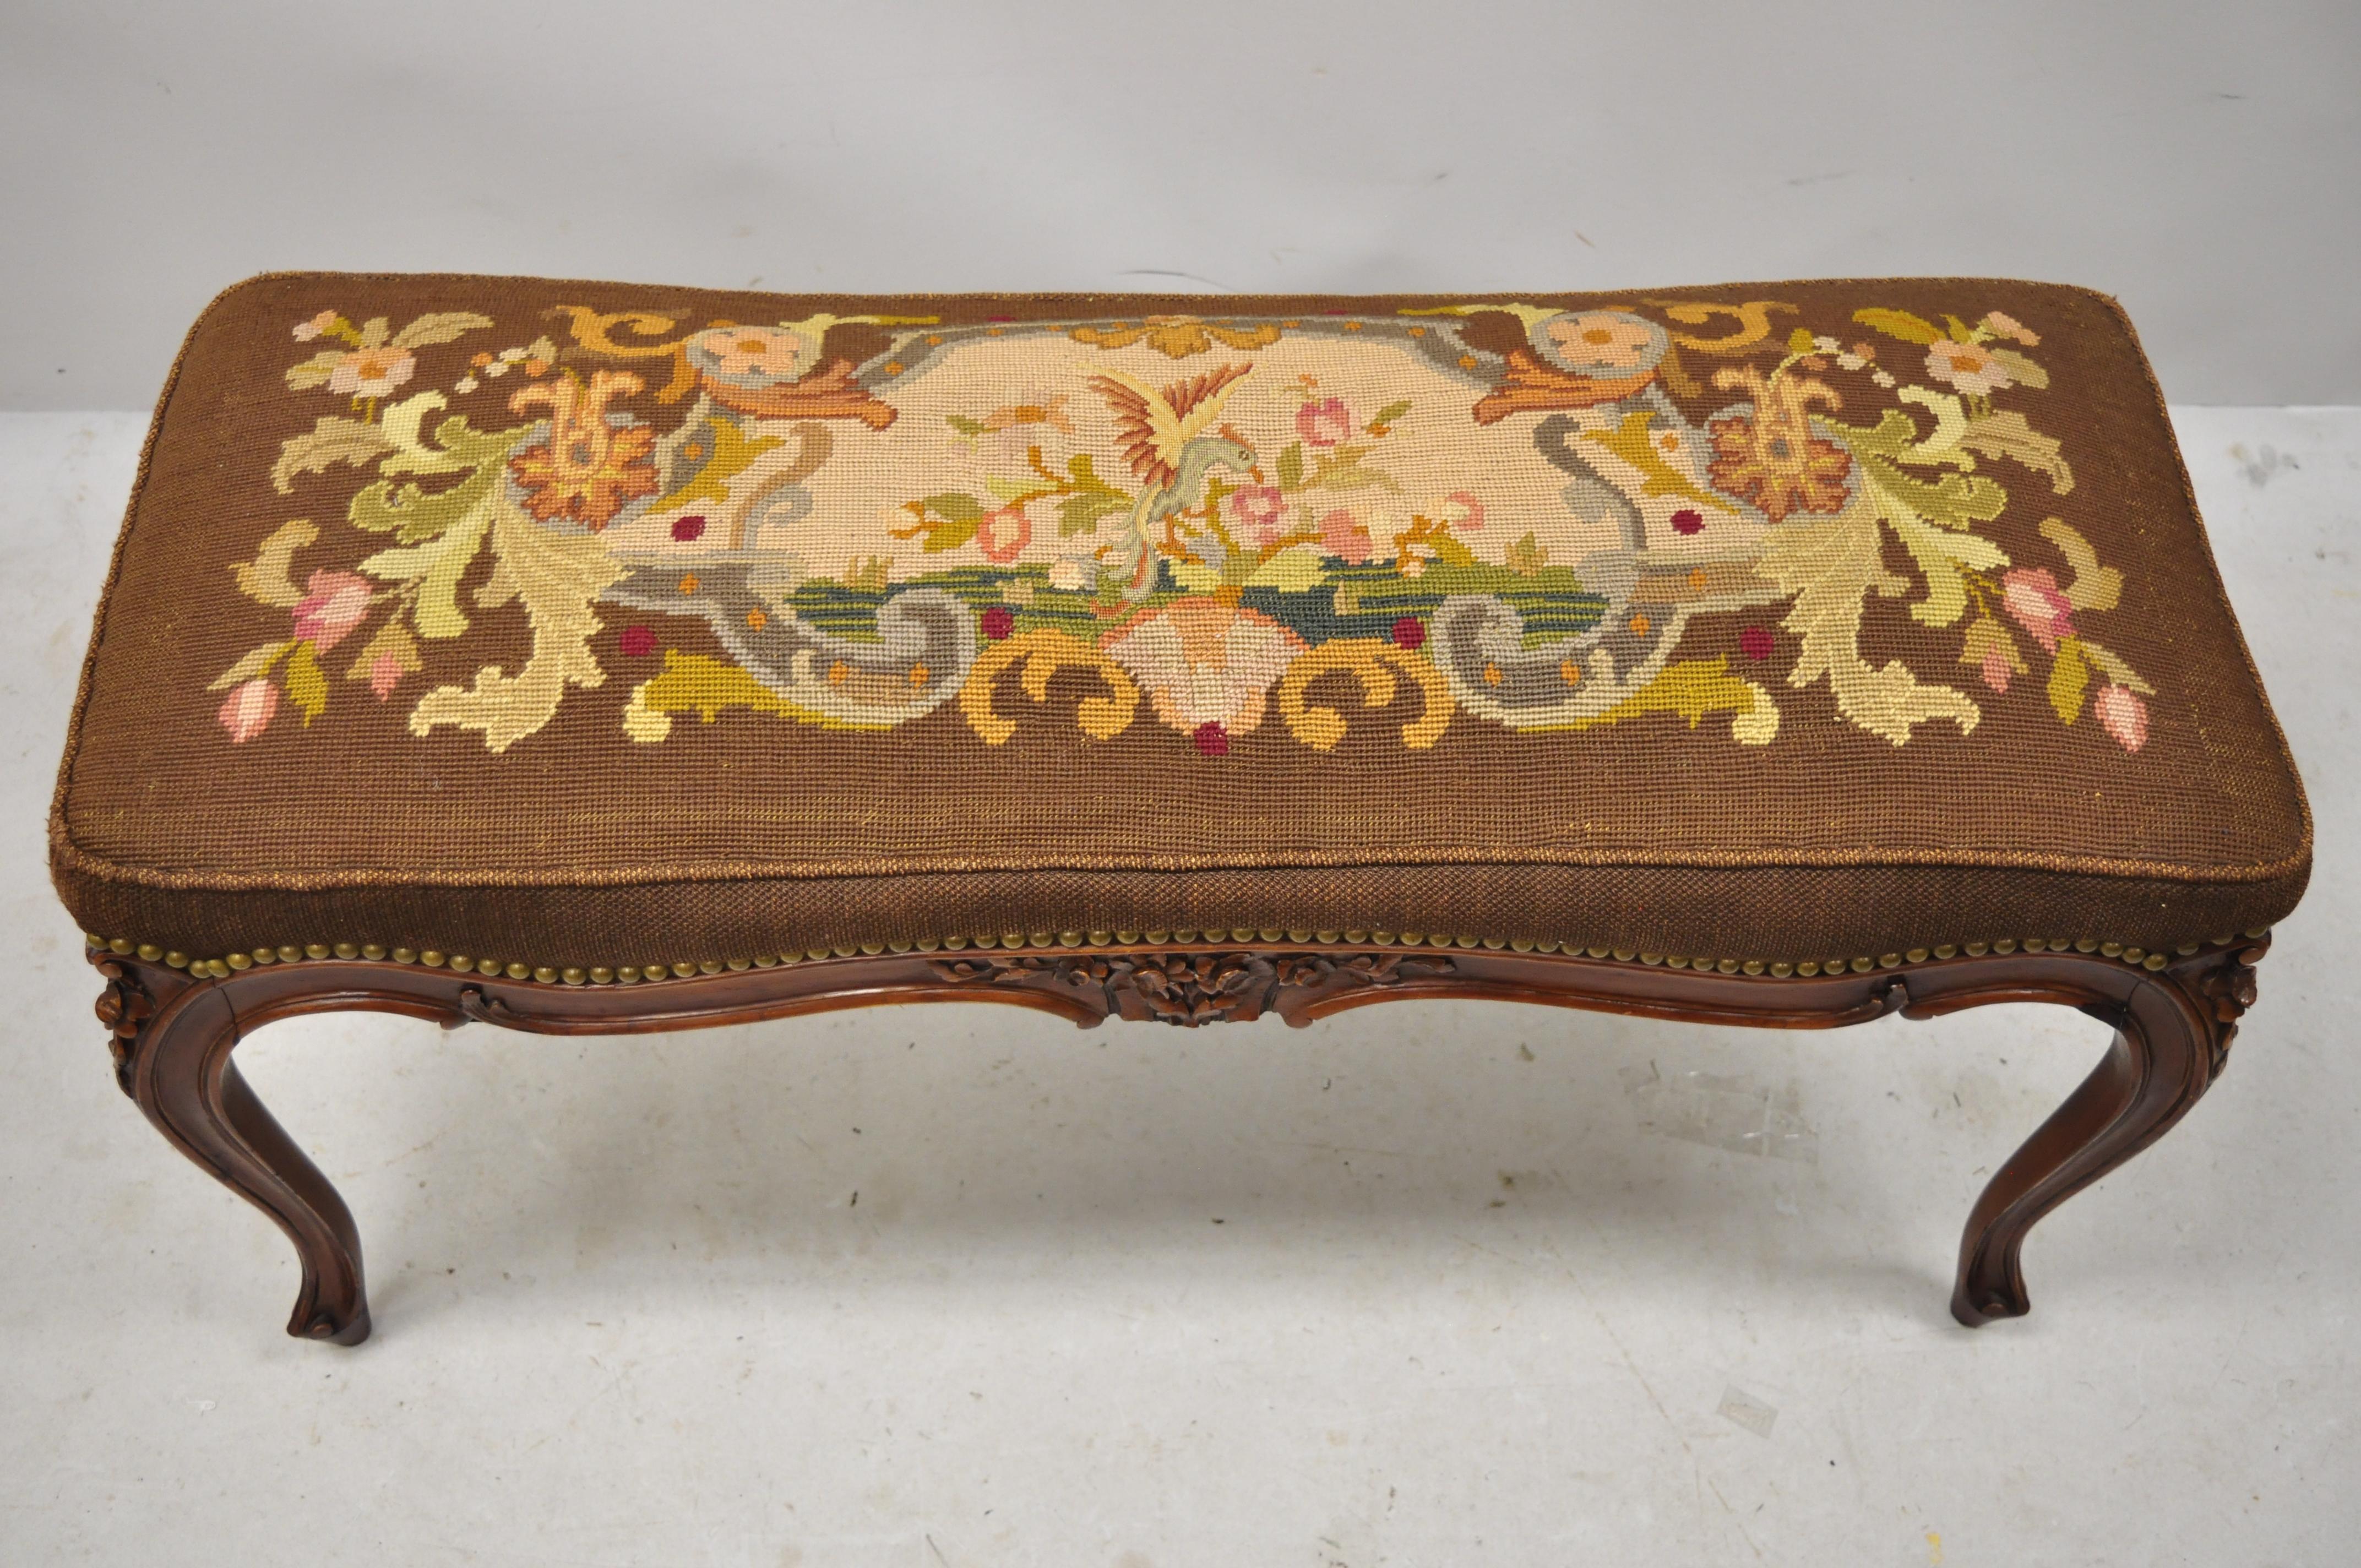 Antique French Louis XV style Victorian carved mahogany needlepoint brown bench. Item features a figural upholstered needlepoint seat, solid wood frame, nicely carved details, cabriole legs, very nice antique item, great style and form, circa early